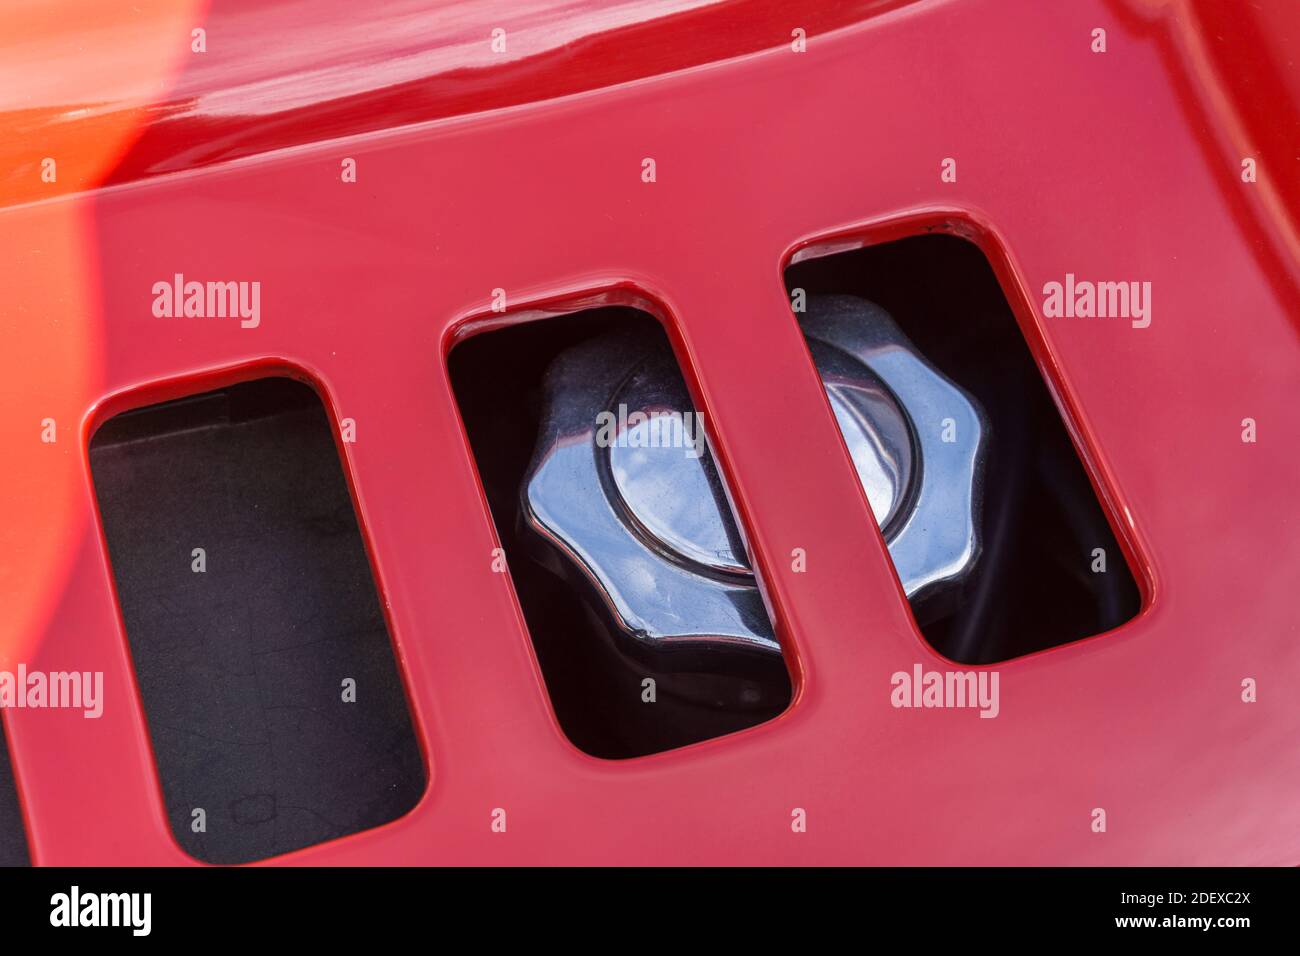 Close up detail of the oil filler cap on a red 1970s Ferrari Dino 246 GT sports car seen through the vent in the engine cover Stock Photo